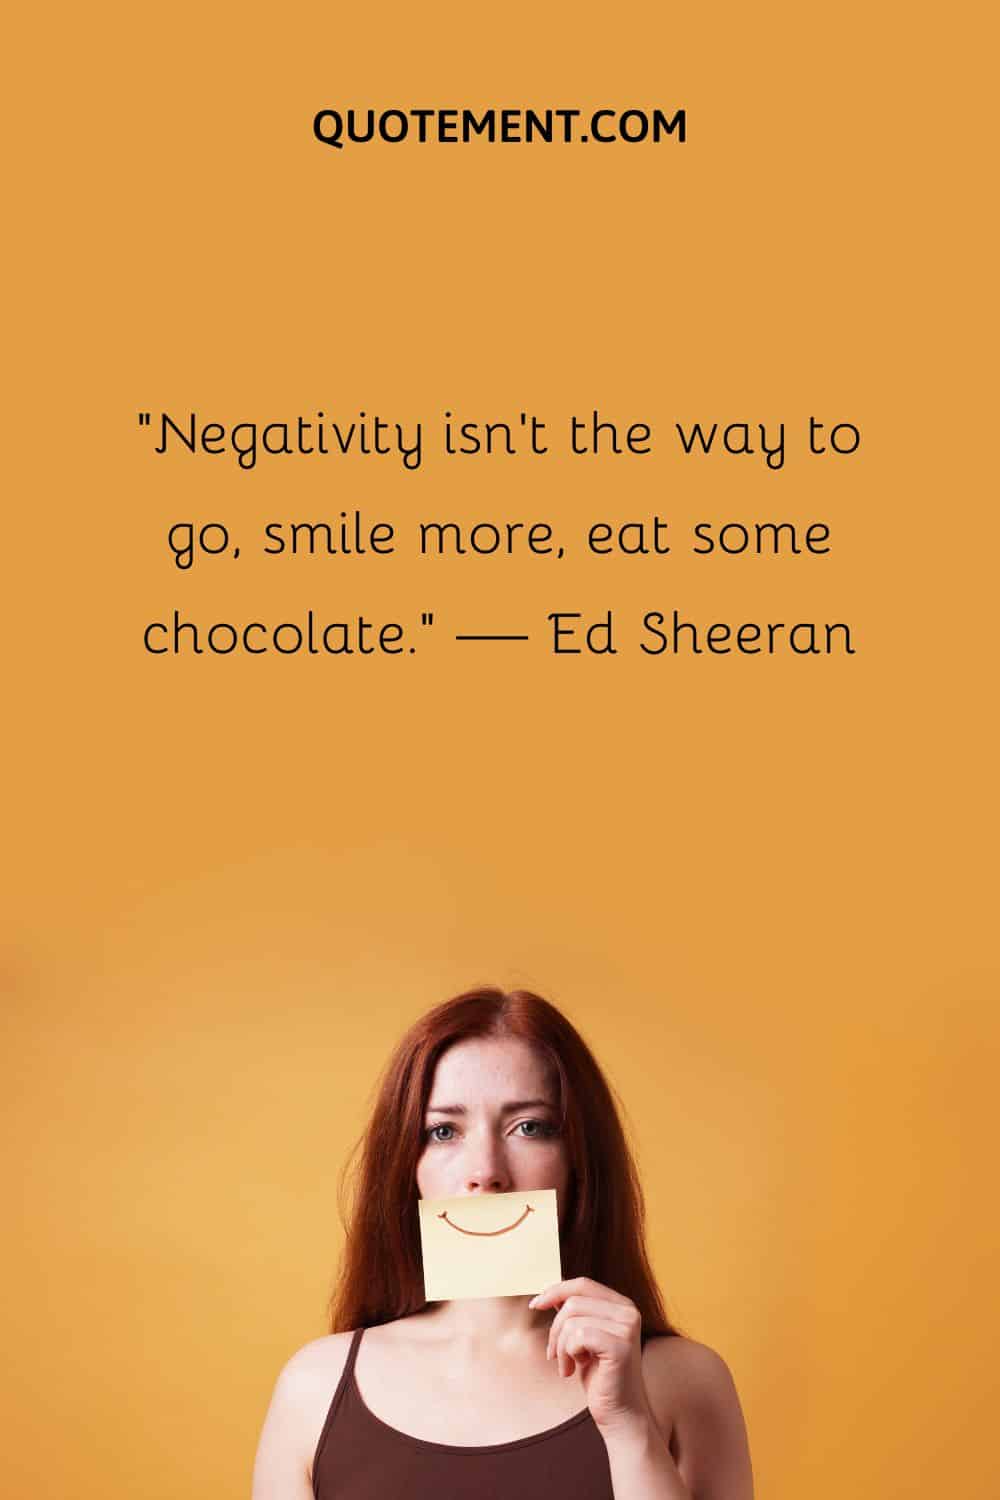 Negativity isn’t the way to go, smile more, eat some chocolate.